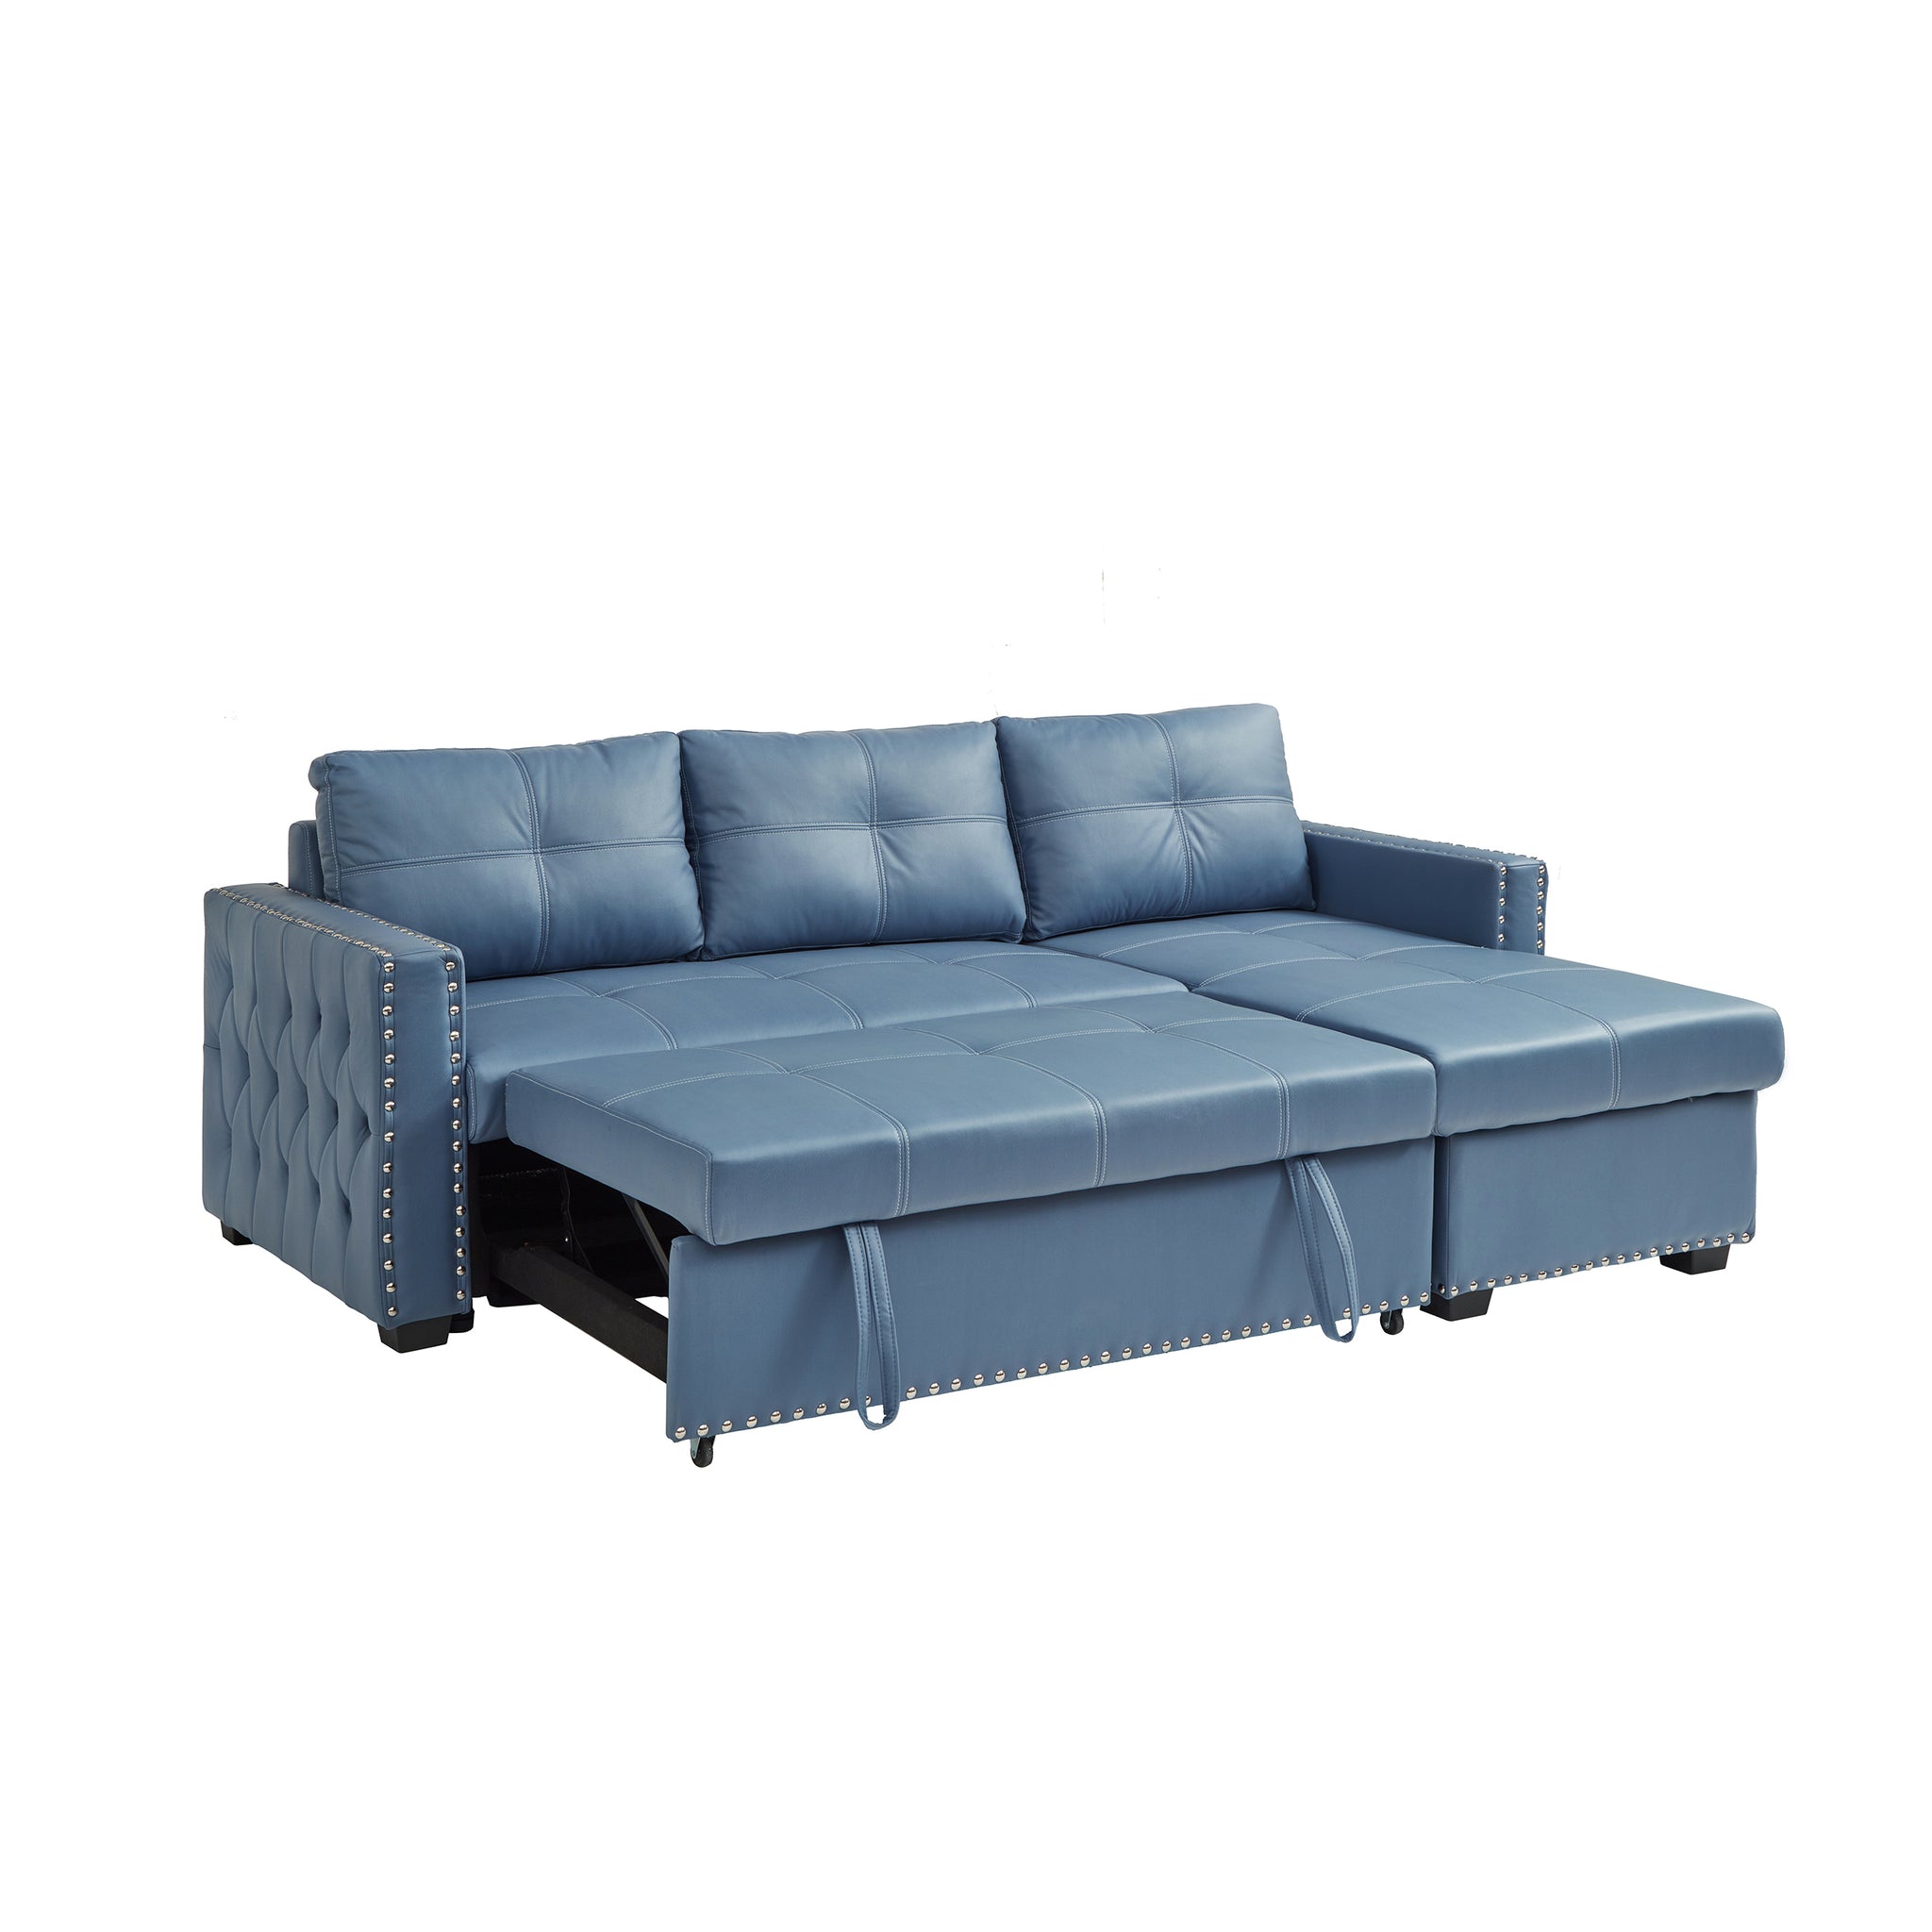 88" Convertible Pull Out Sofa Bed with Storage Chaise blue-microfiber